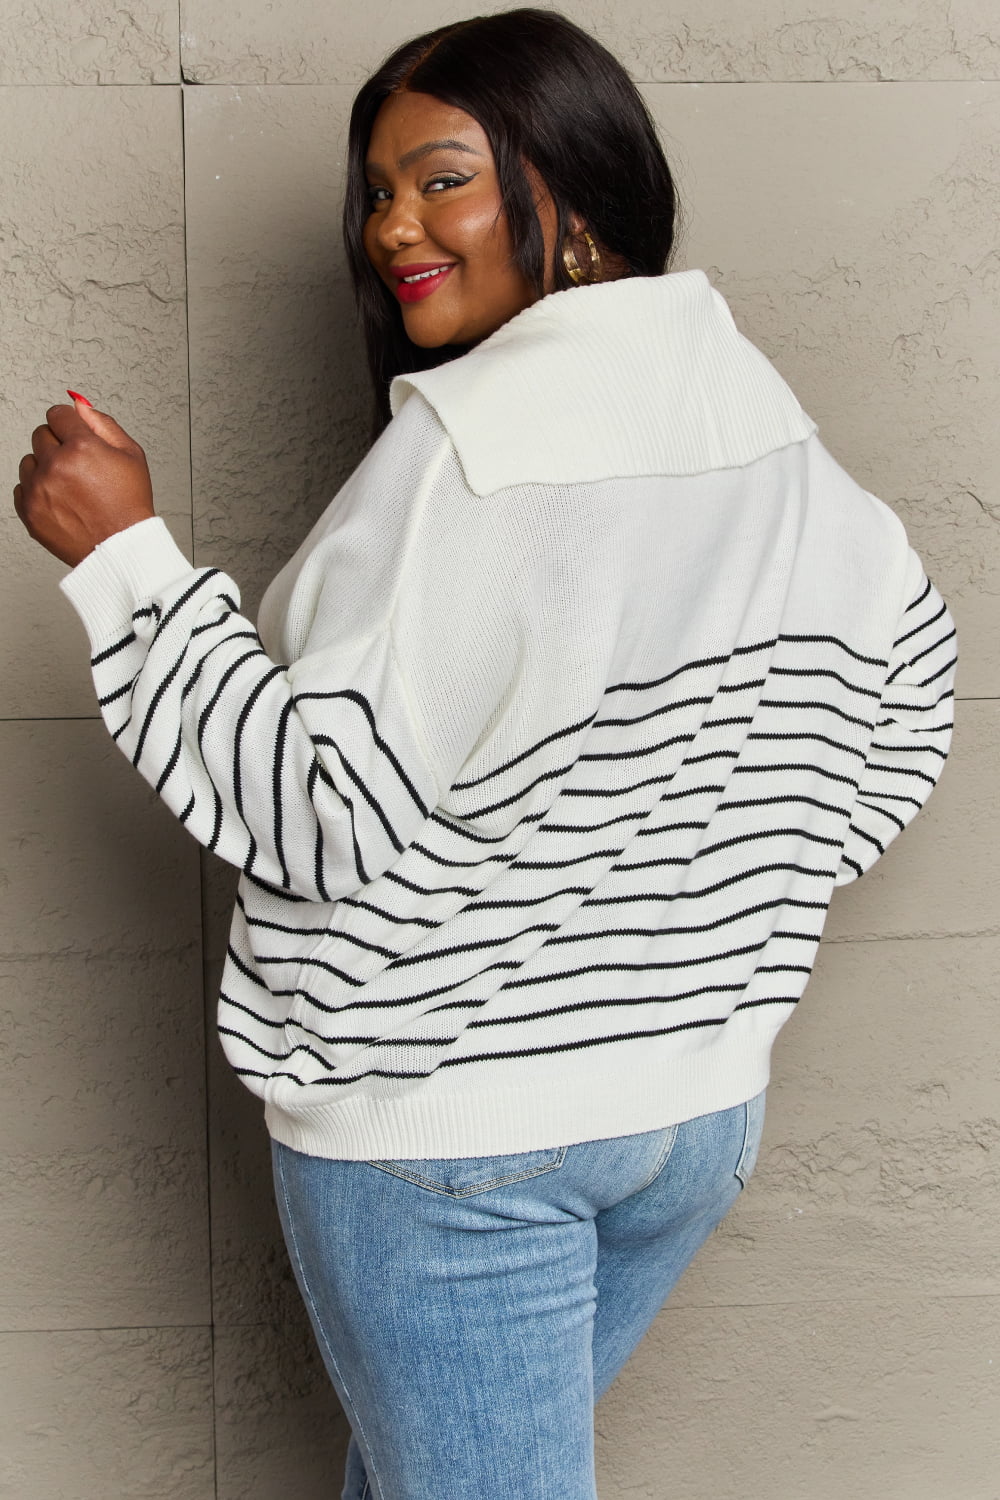 Make Me Smile Striped Oversized Knit Top - Women’s Clothing & Accessories - Shirts & Tops - 8 - 2024